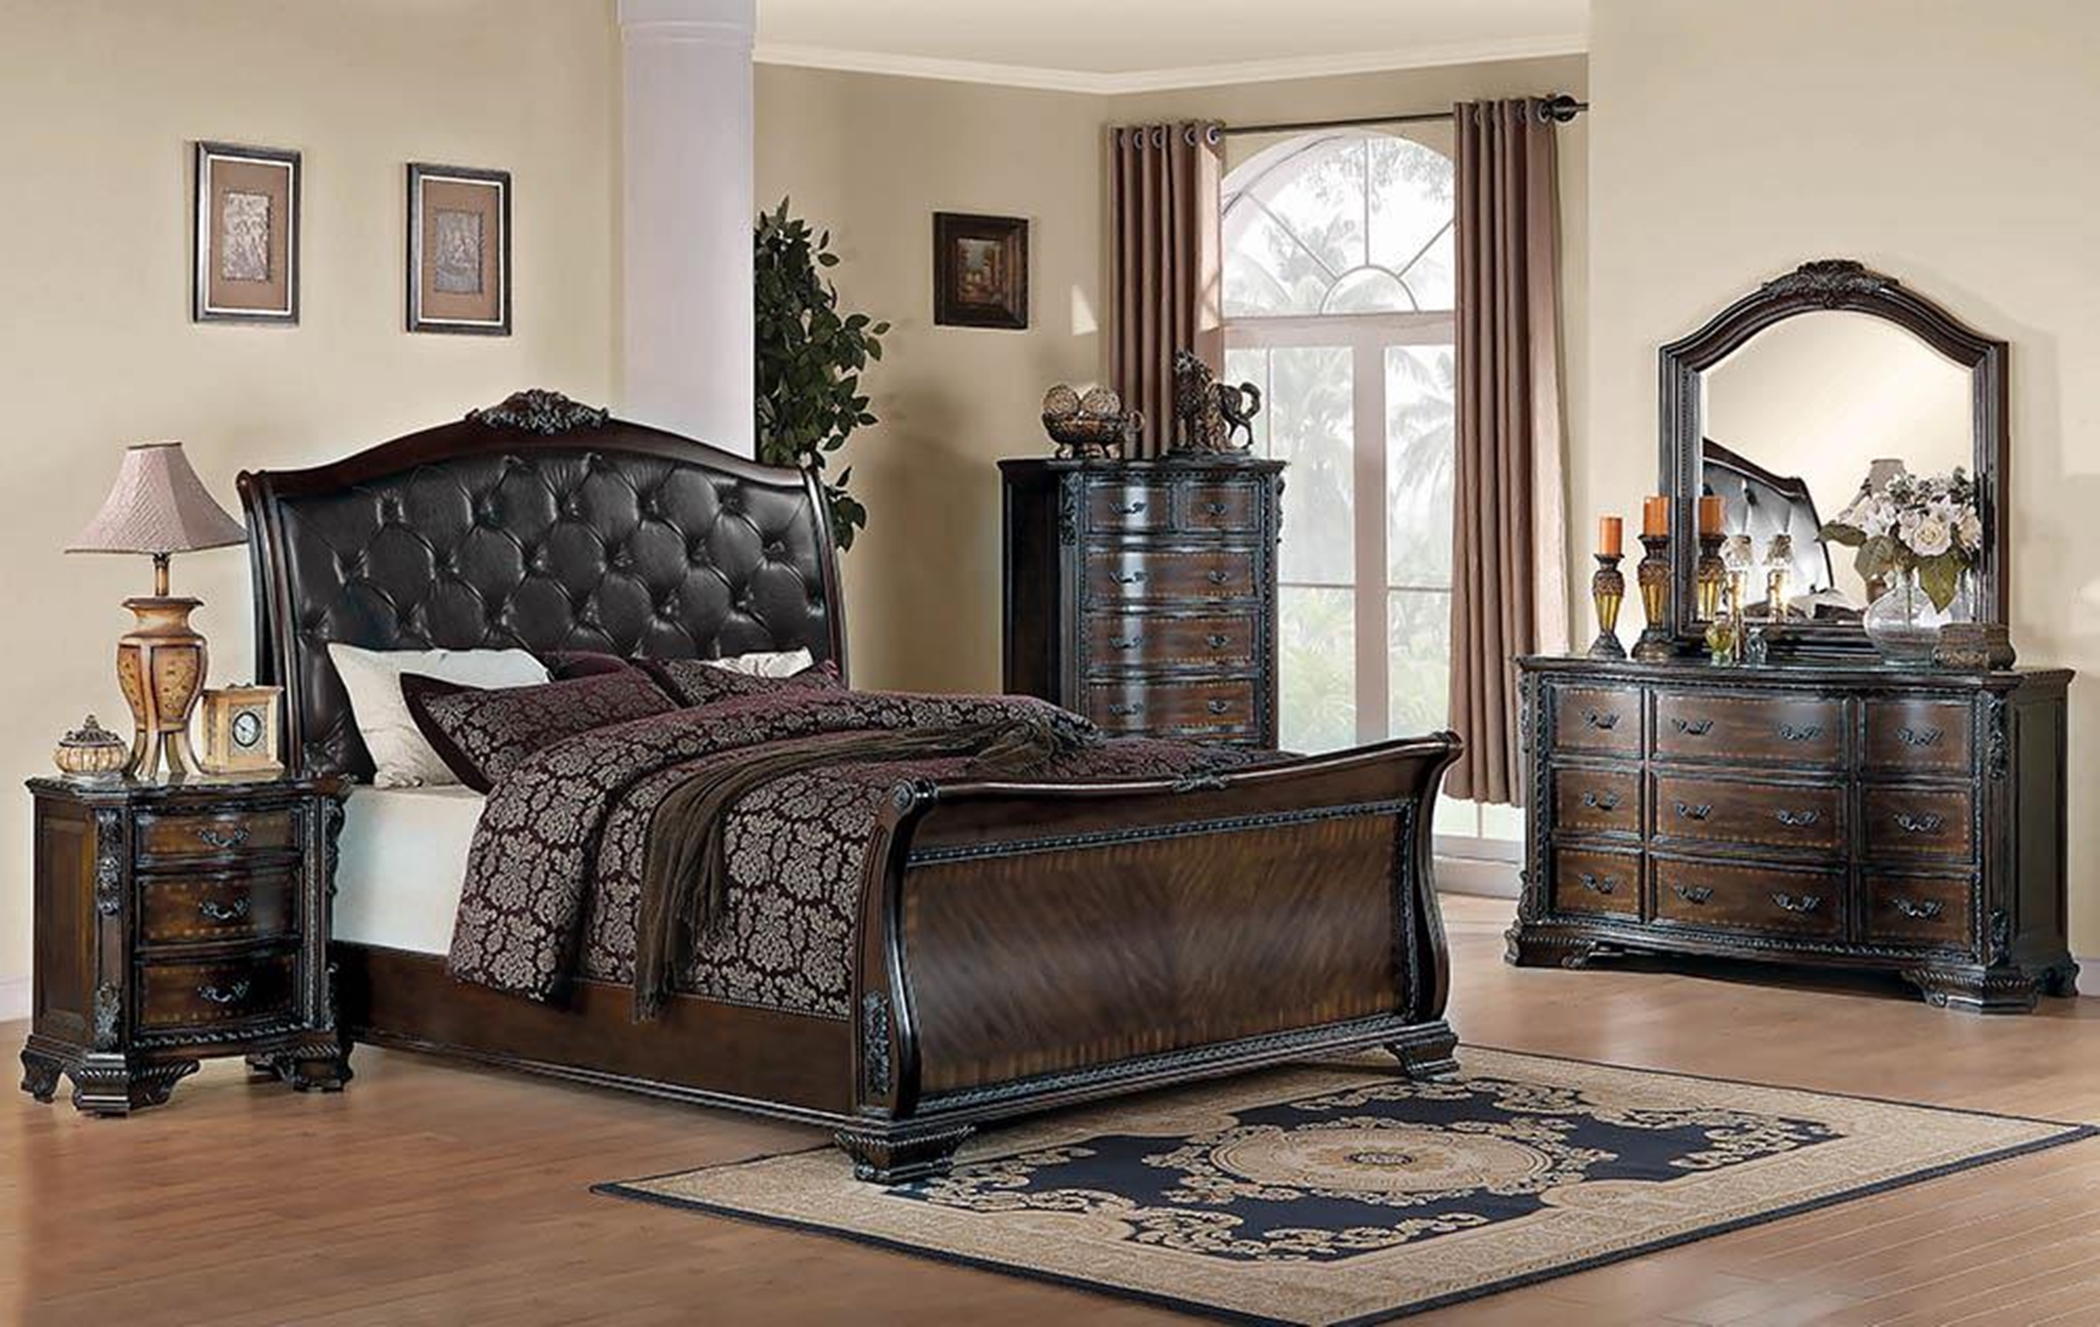 Maddison Brown Cherry Cal. King Bed - Click Image to Close